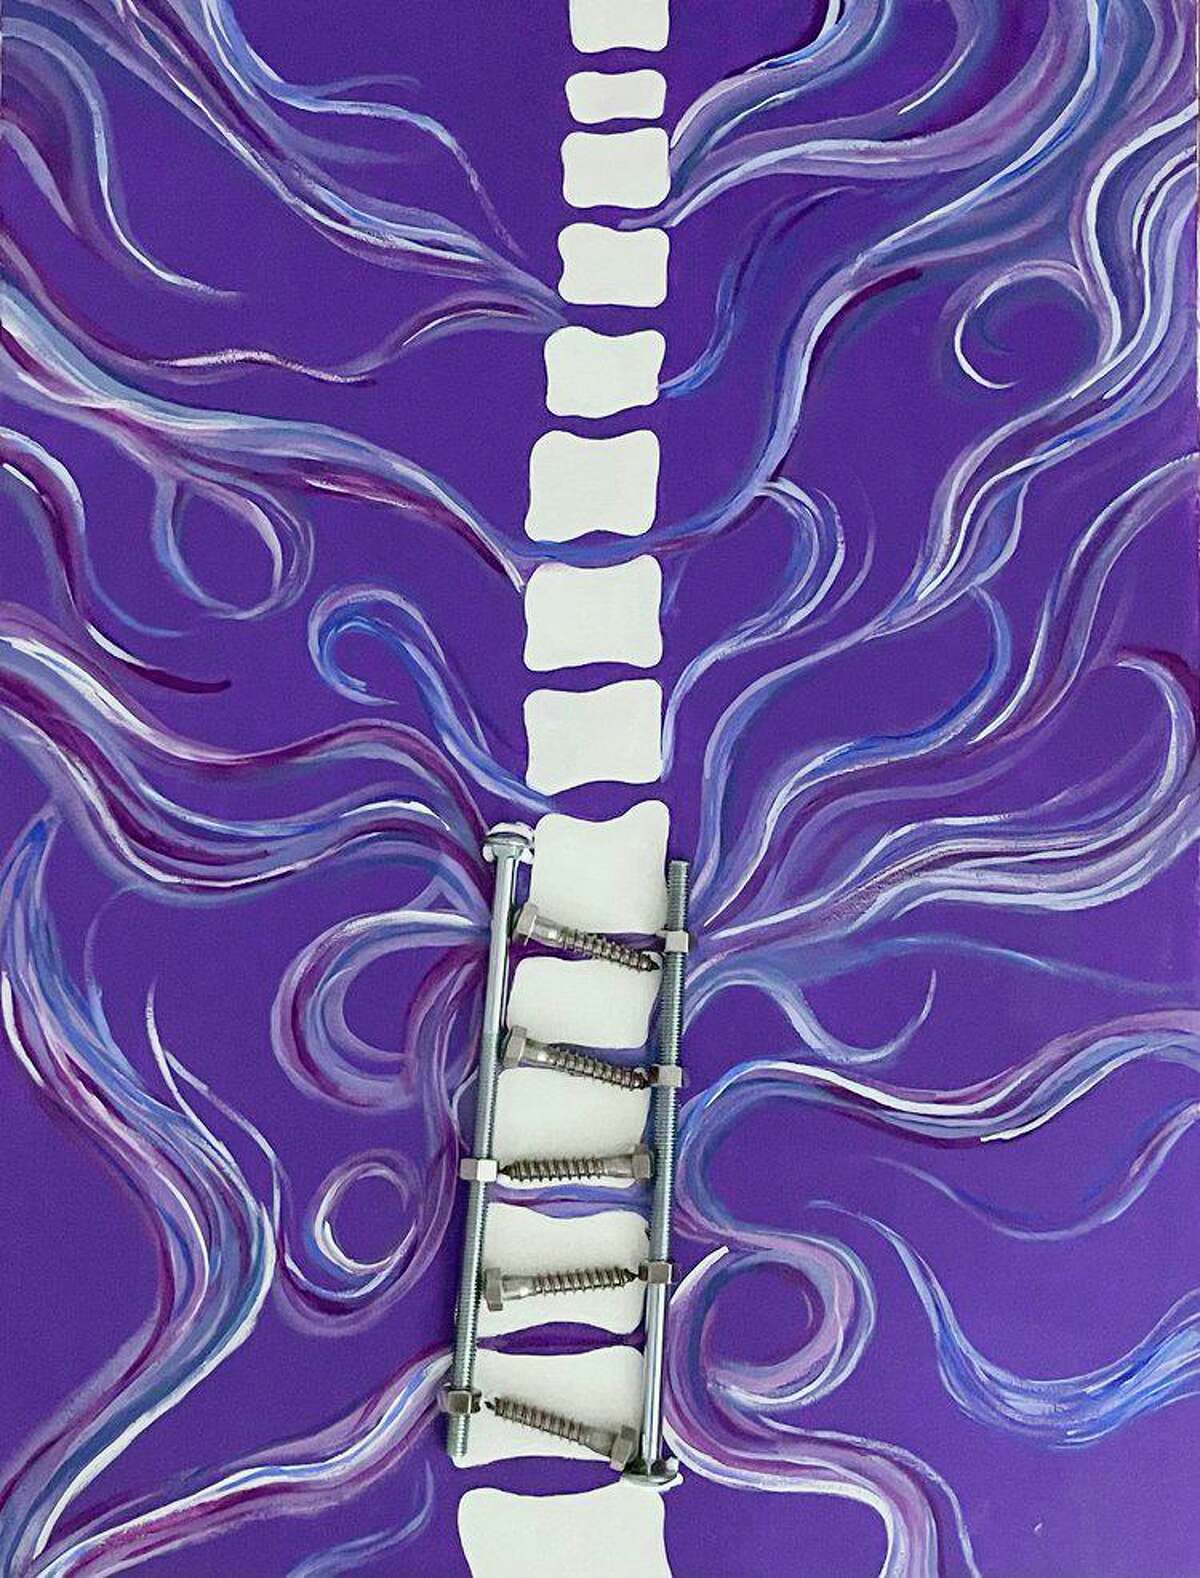 Ava Lee’s art in her exhibit “43 Degrees” explores her journey from scoliosis diagnosis to eventual surgery.